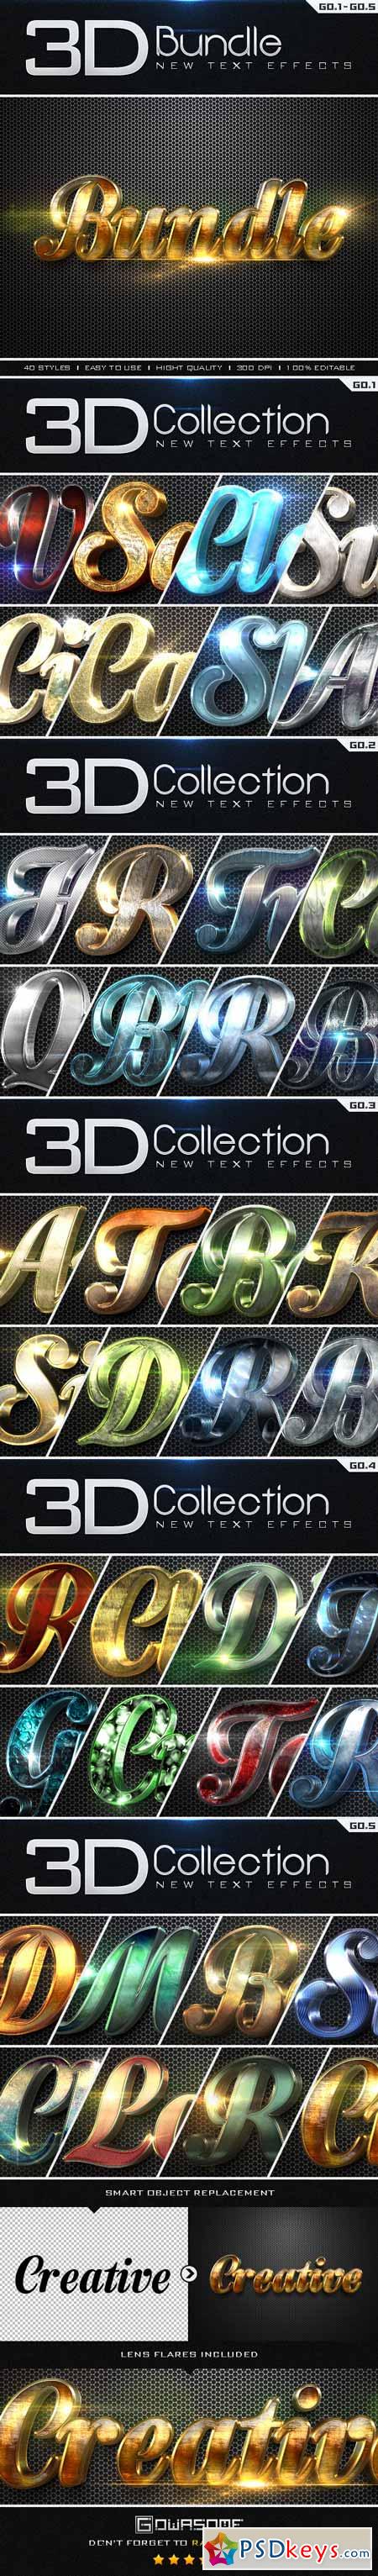 New 3D Collection Text Effects Bundle 9792352